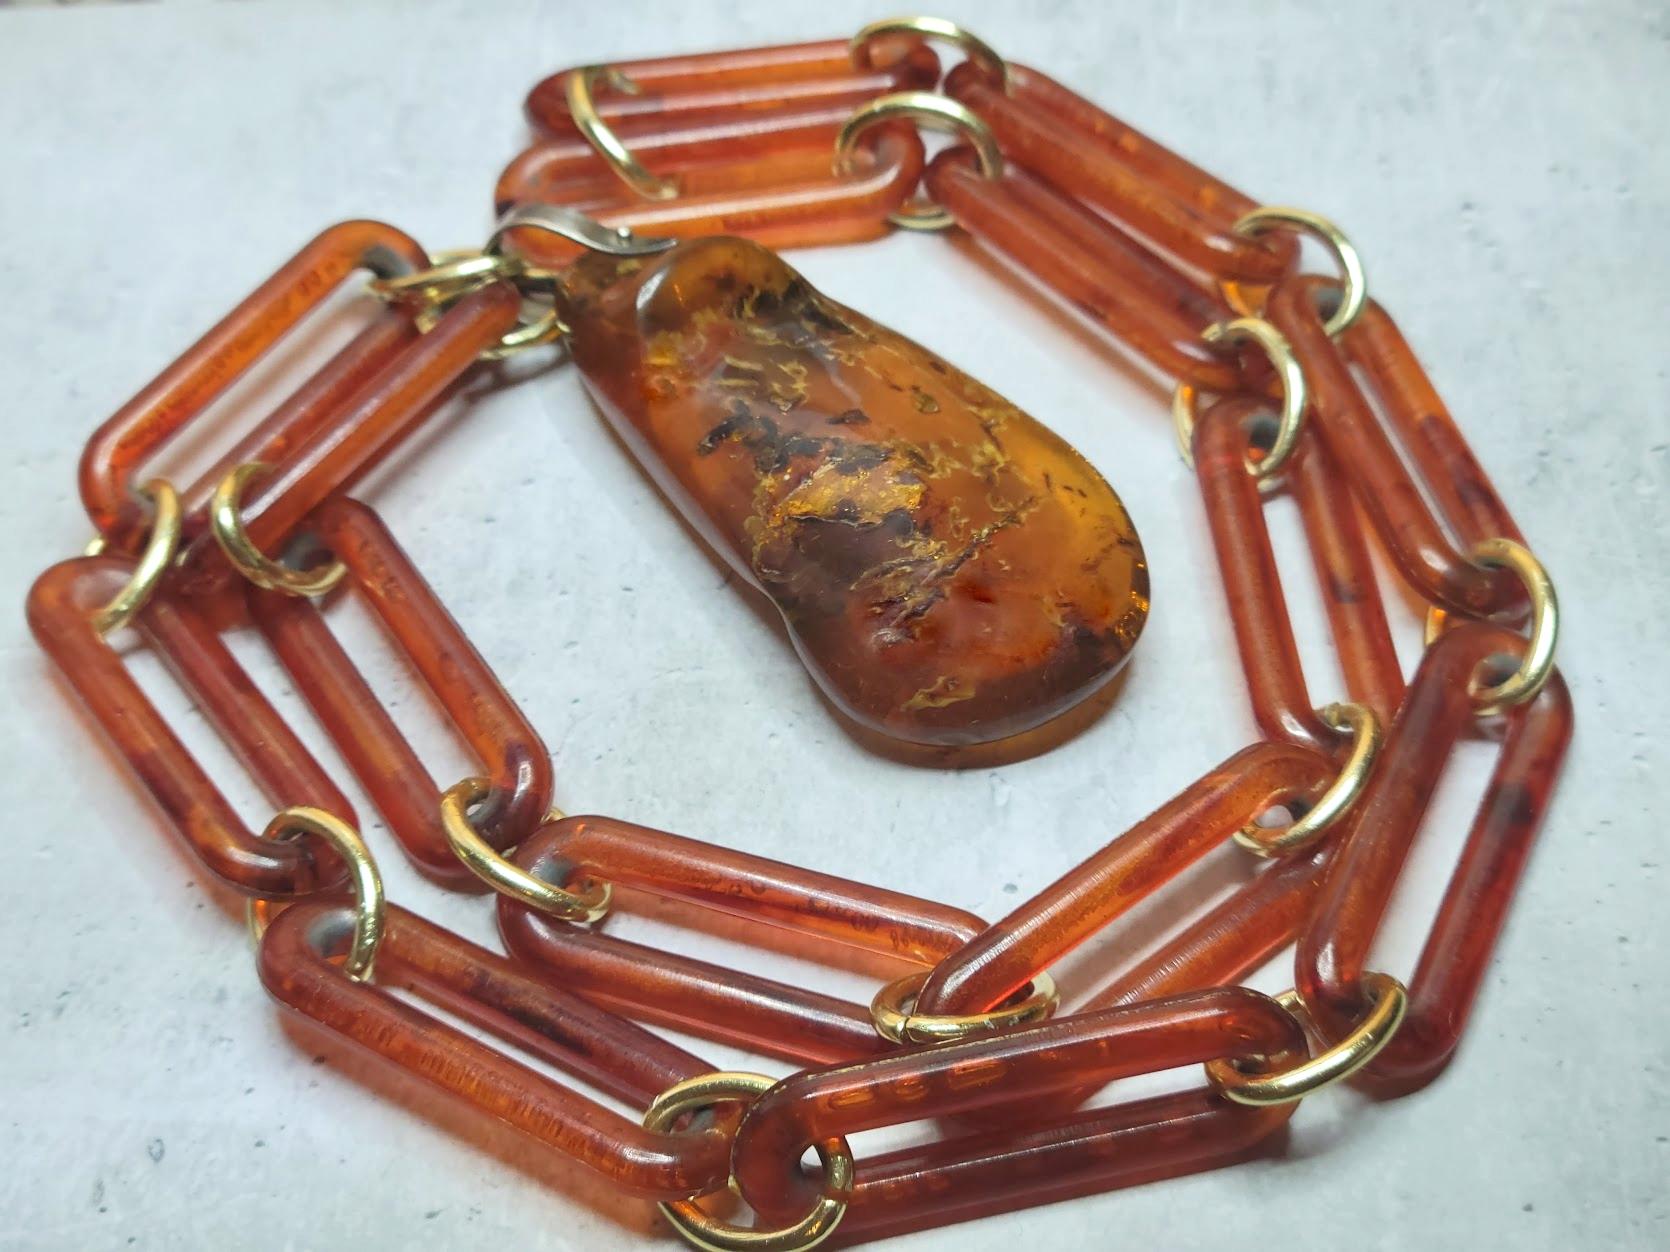 Fabulous genuine Baltic Amber pendant necklace set in 925 Silver with old plastic.
The length of the chain necklace is 32 inches (81 cm). The size of the amber pendant is 3 inches (7.6cm). Extraordinary amber size. 
The weight of the necklace is